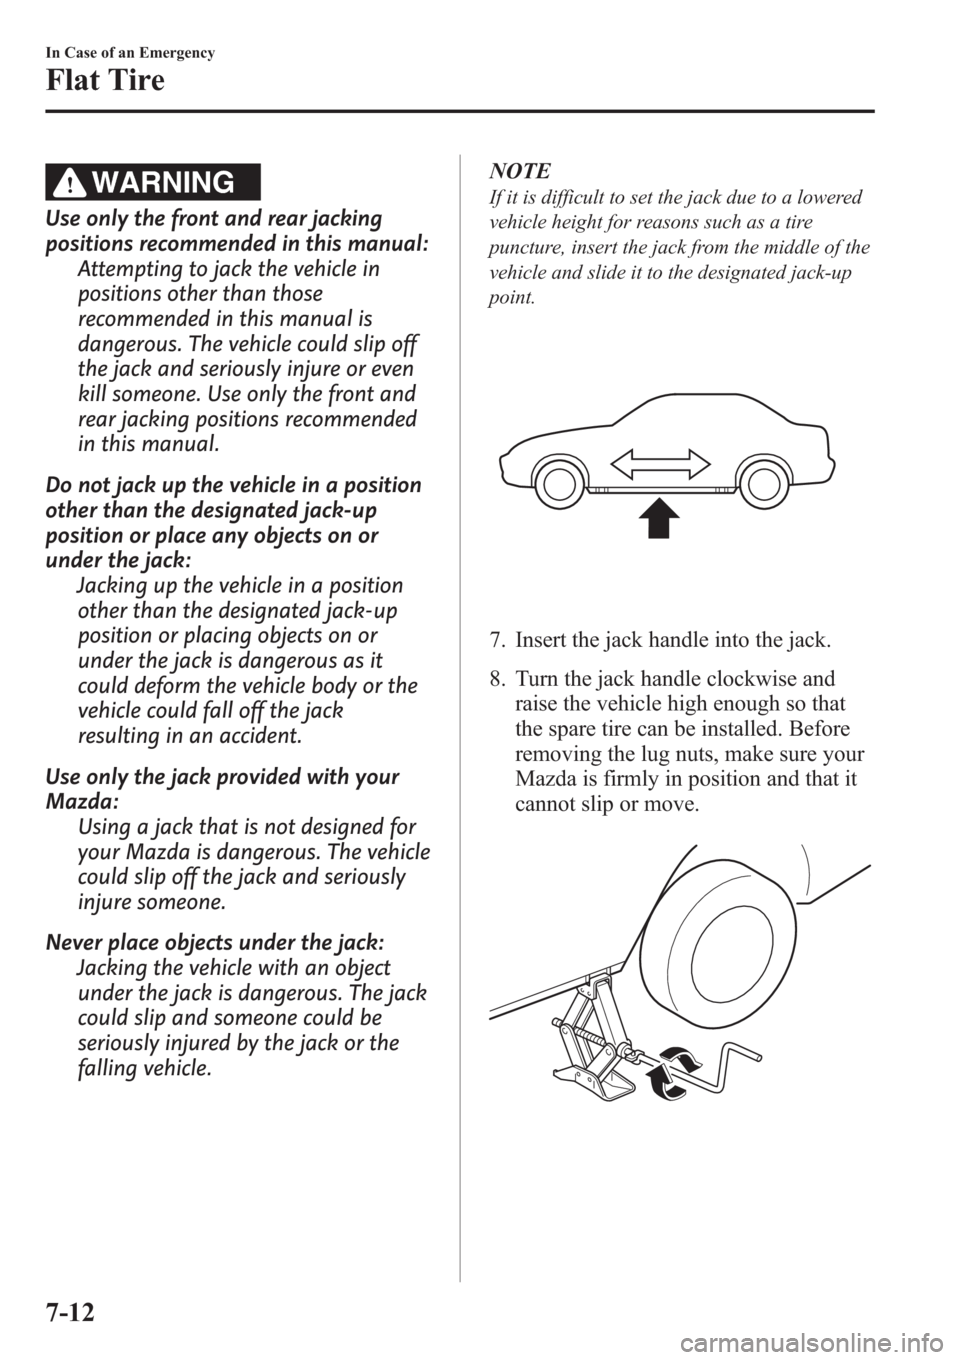 MAZDA MODEL 3 HATCHBACK 2013  Owners Manual (in English) WARNING
Use only the front and rear jacking
positions recommended in this manual:
Attempting to jack the vehicle in
positions other than those
recommended in this manual is
dangerous. The vehicle coul